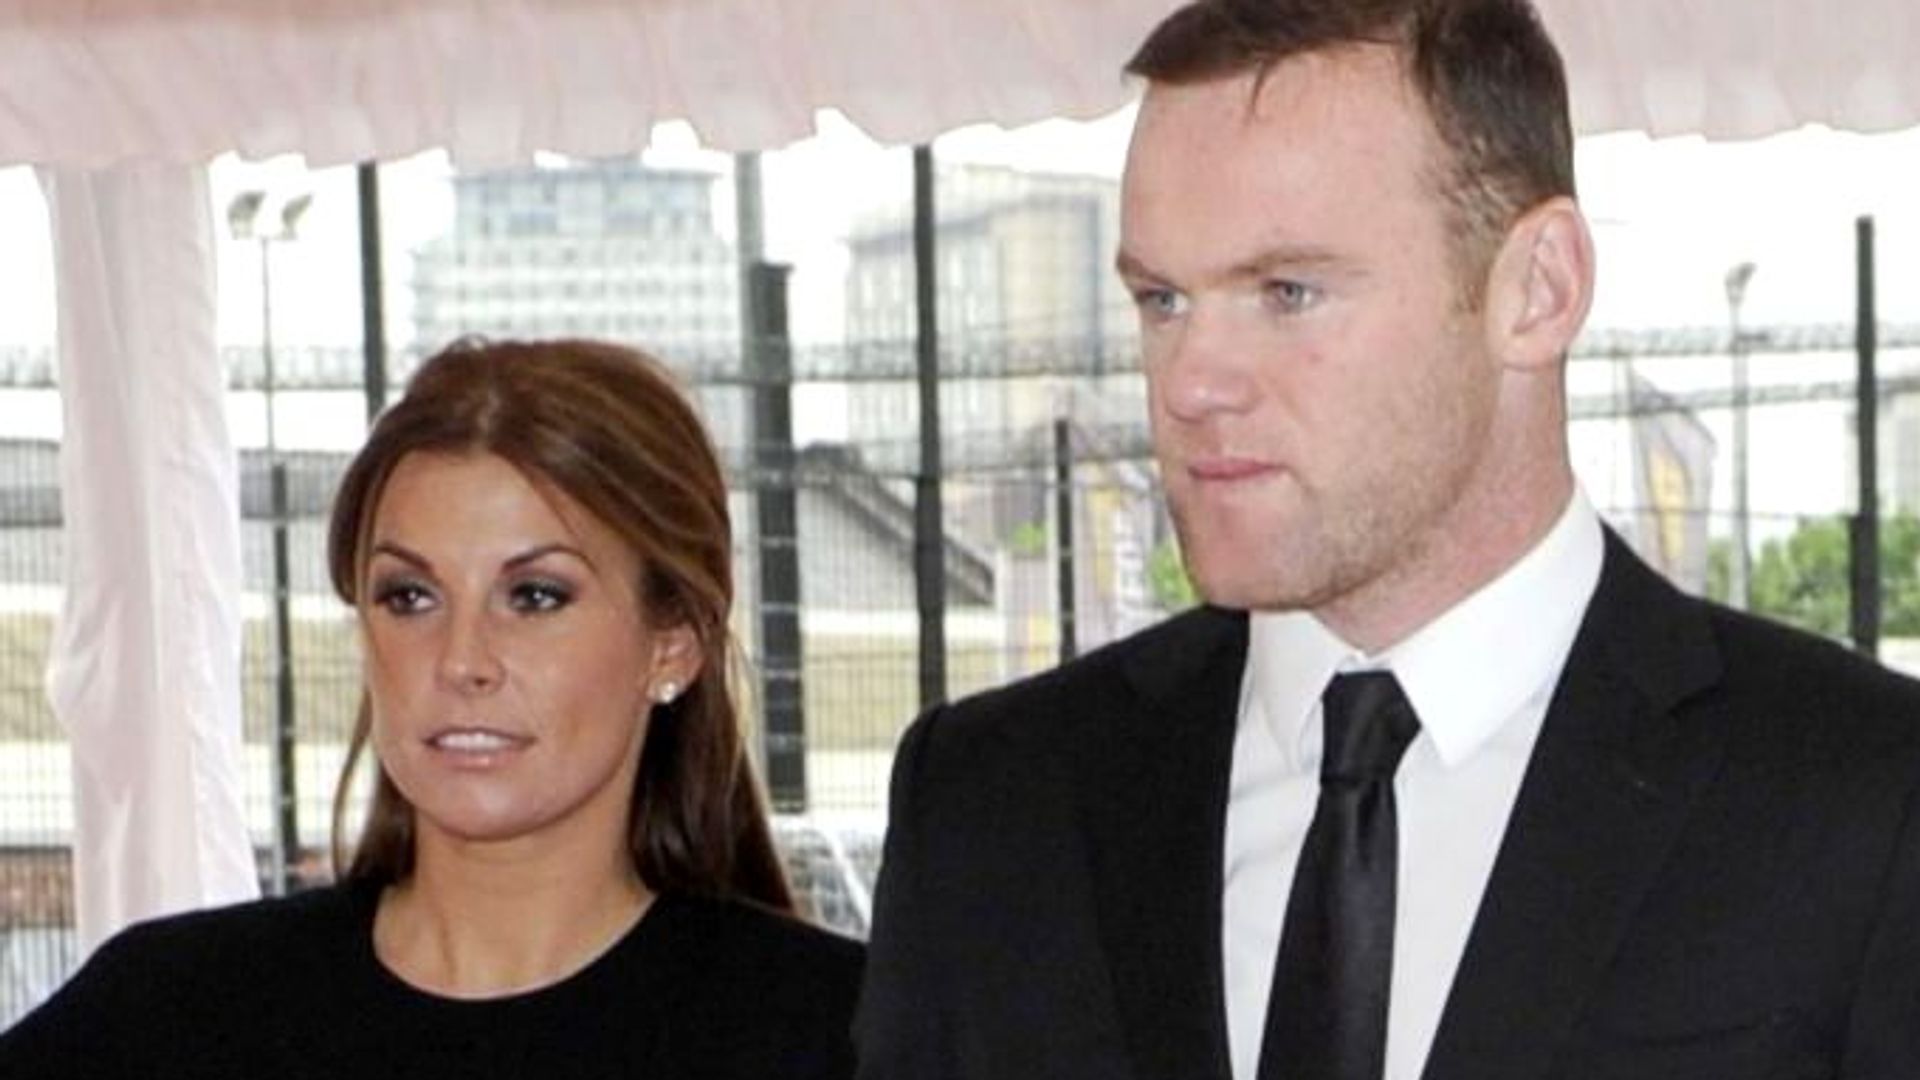 Wayne Rooney and Coleen Rooney in matching black outfits